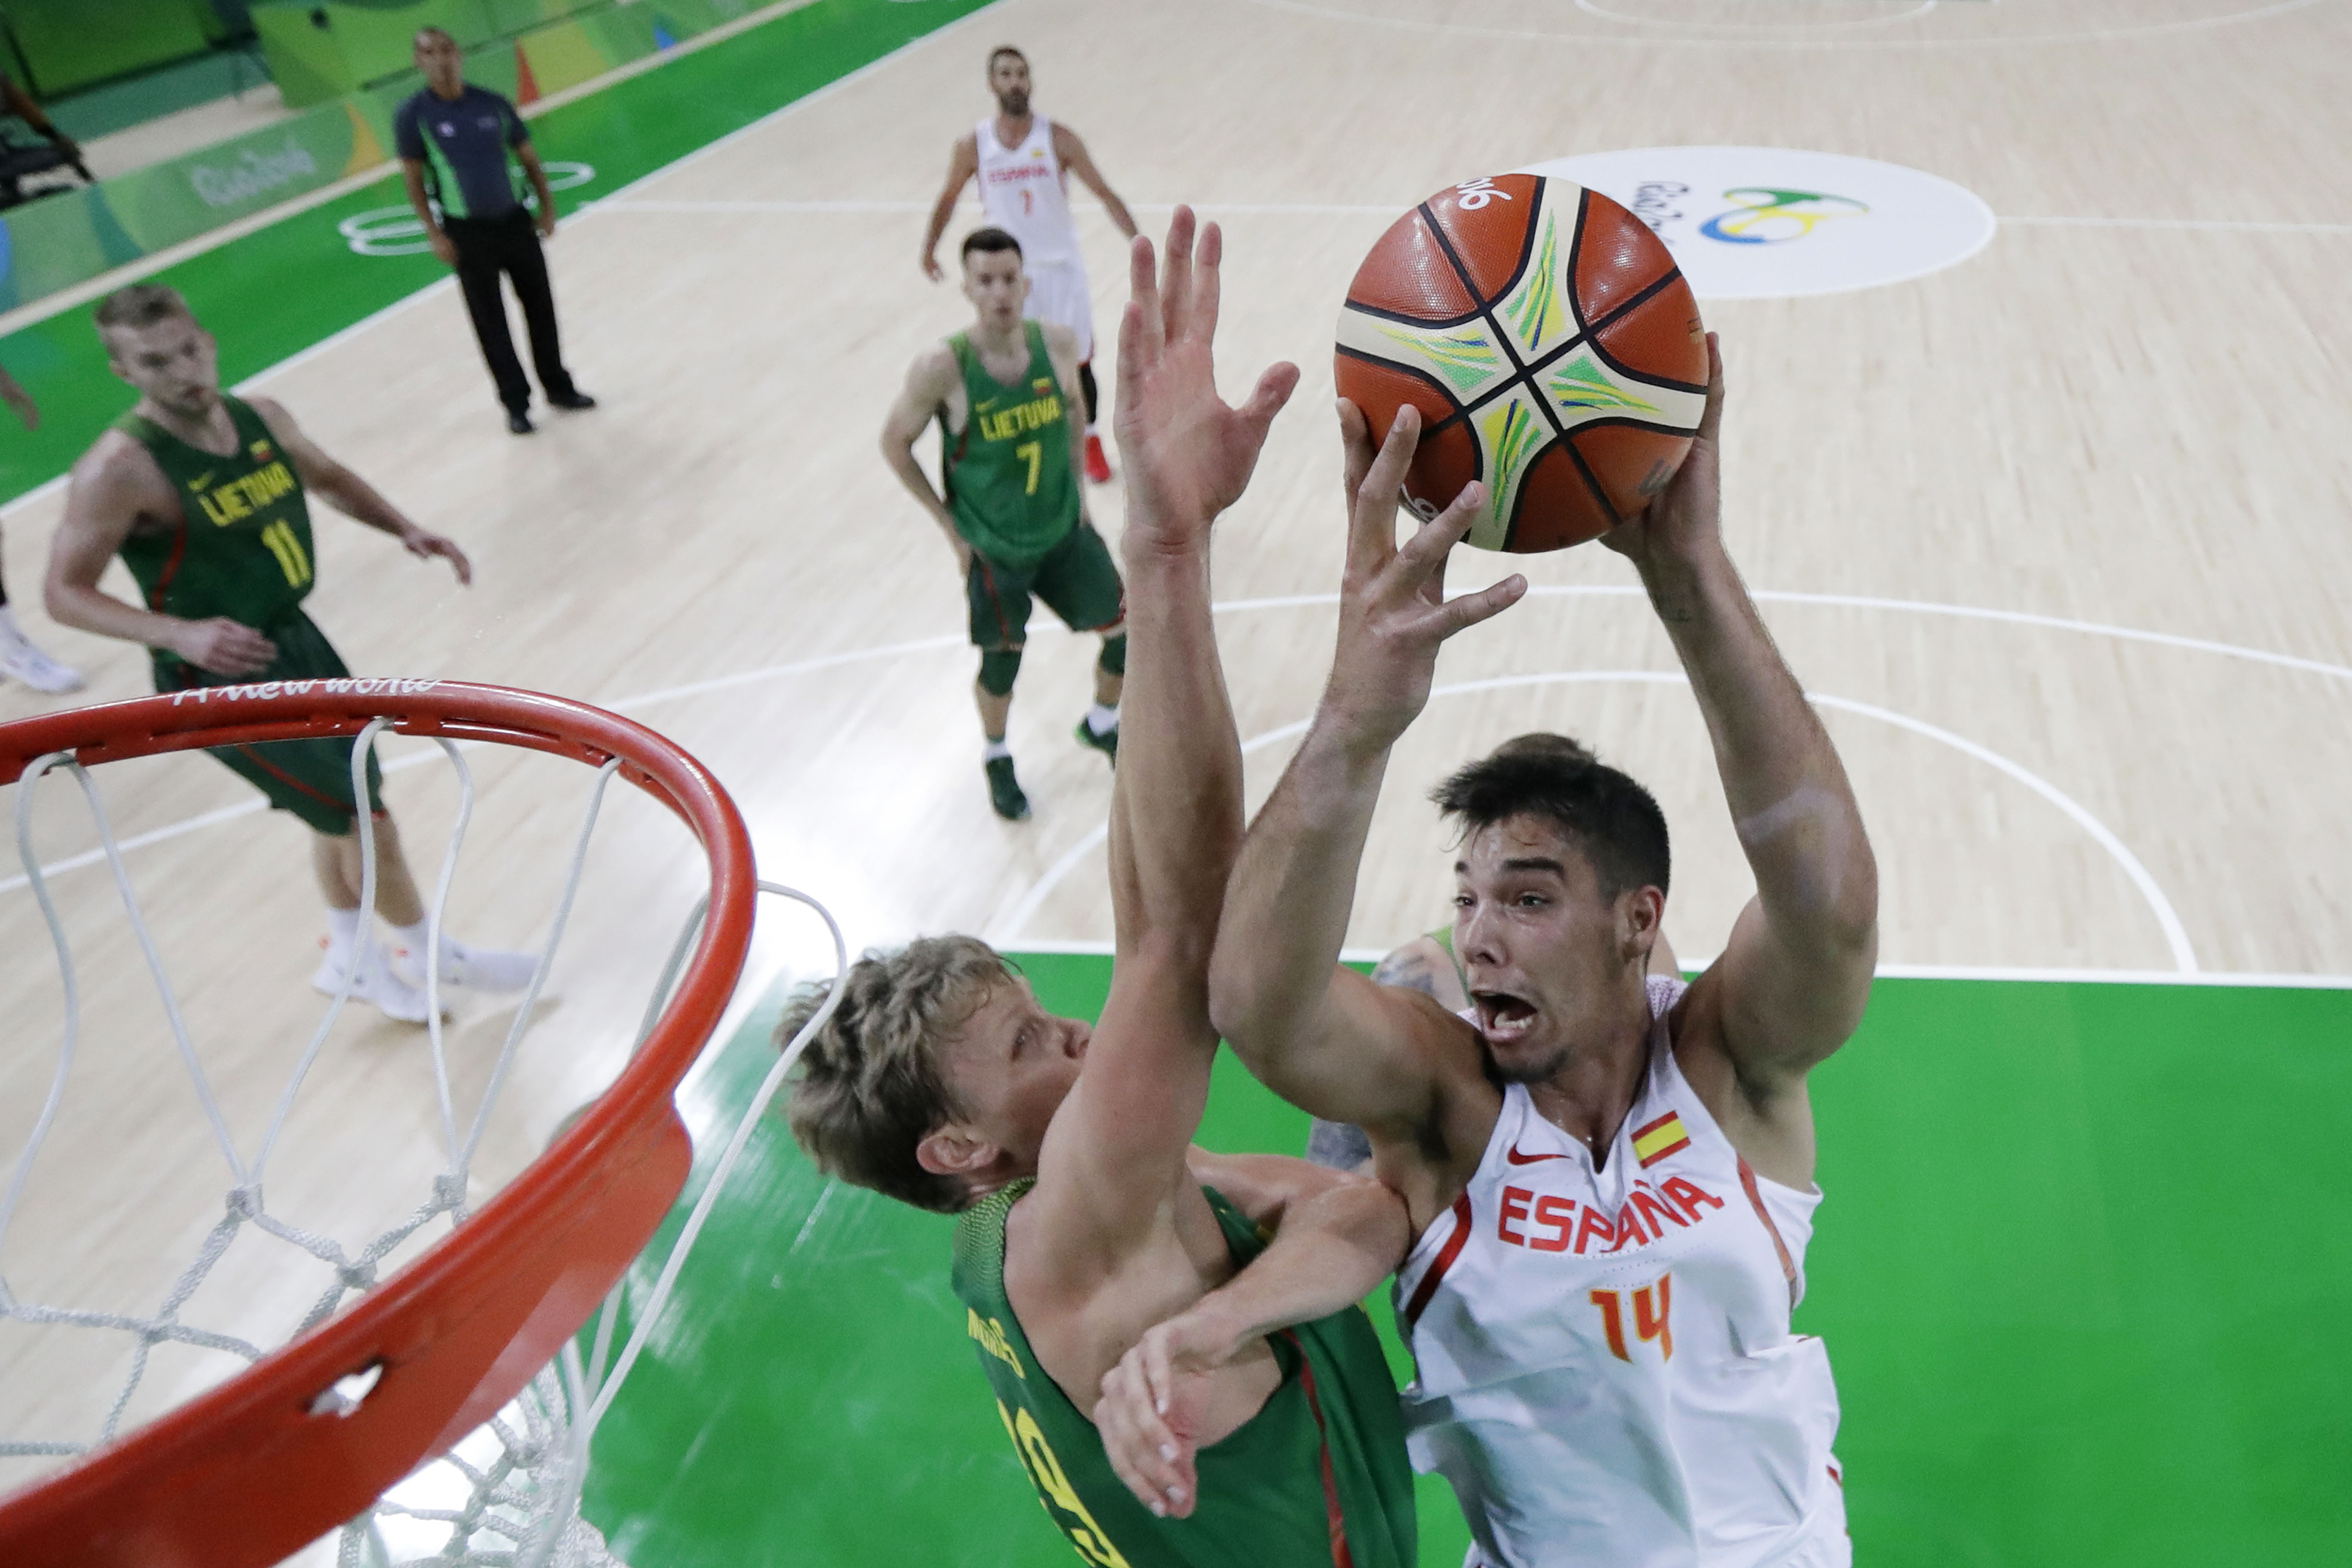 Spain's centre Willy Hernangomez (R) jumps for a basket by Lithuania's small forward Mindaugas Kuzminskas during a Men's round Group B basketball match between Spain and Lithuania at the Carioca Arena 1 in Rio de Janeiro on August 13, 2016 during the Rio 2016 Olympic Games. / AFP / POOL / STR (Photo credit should read STR/AFP/Getty Images)